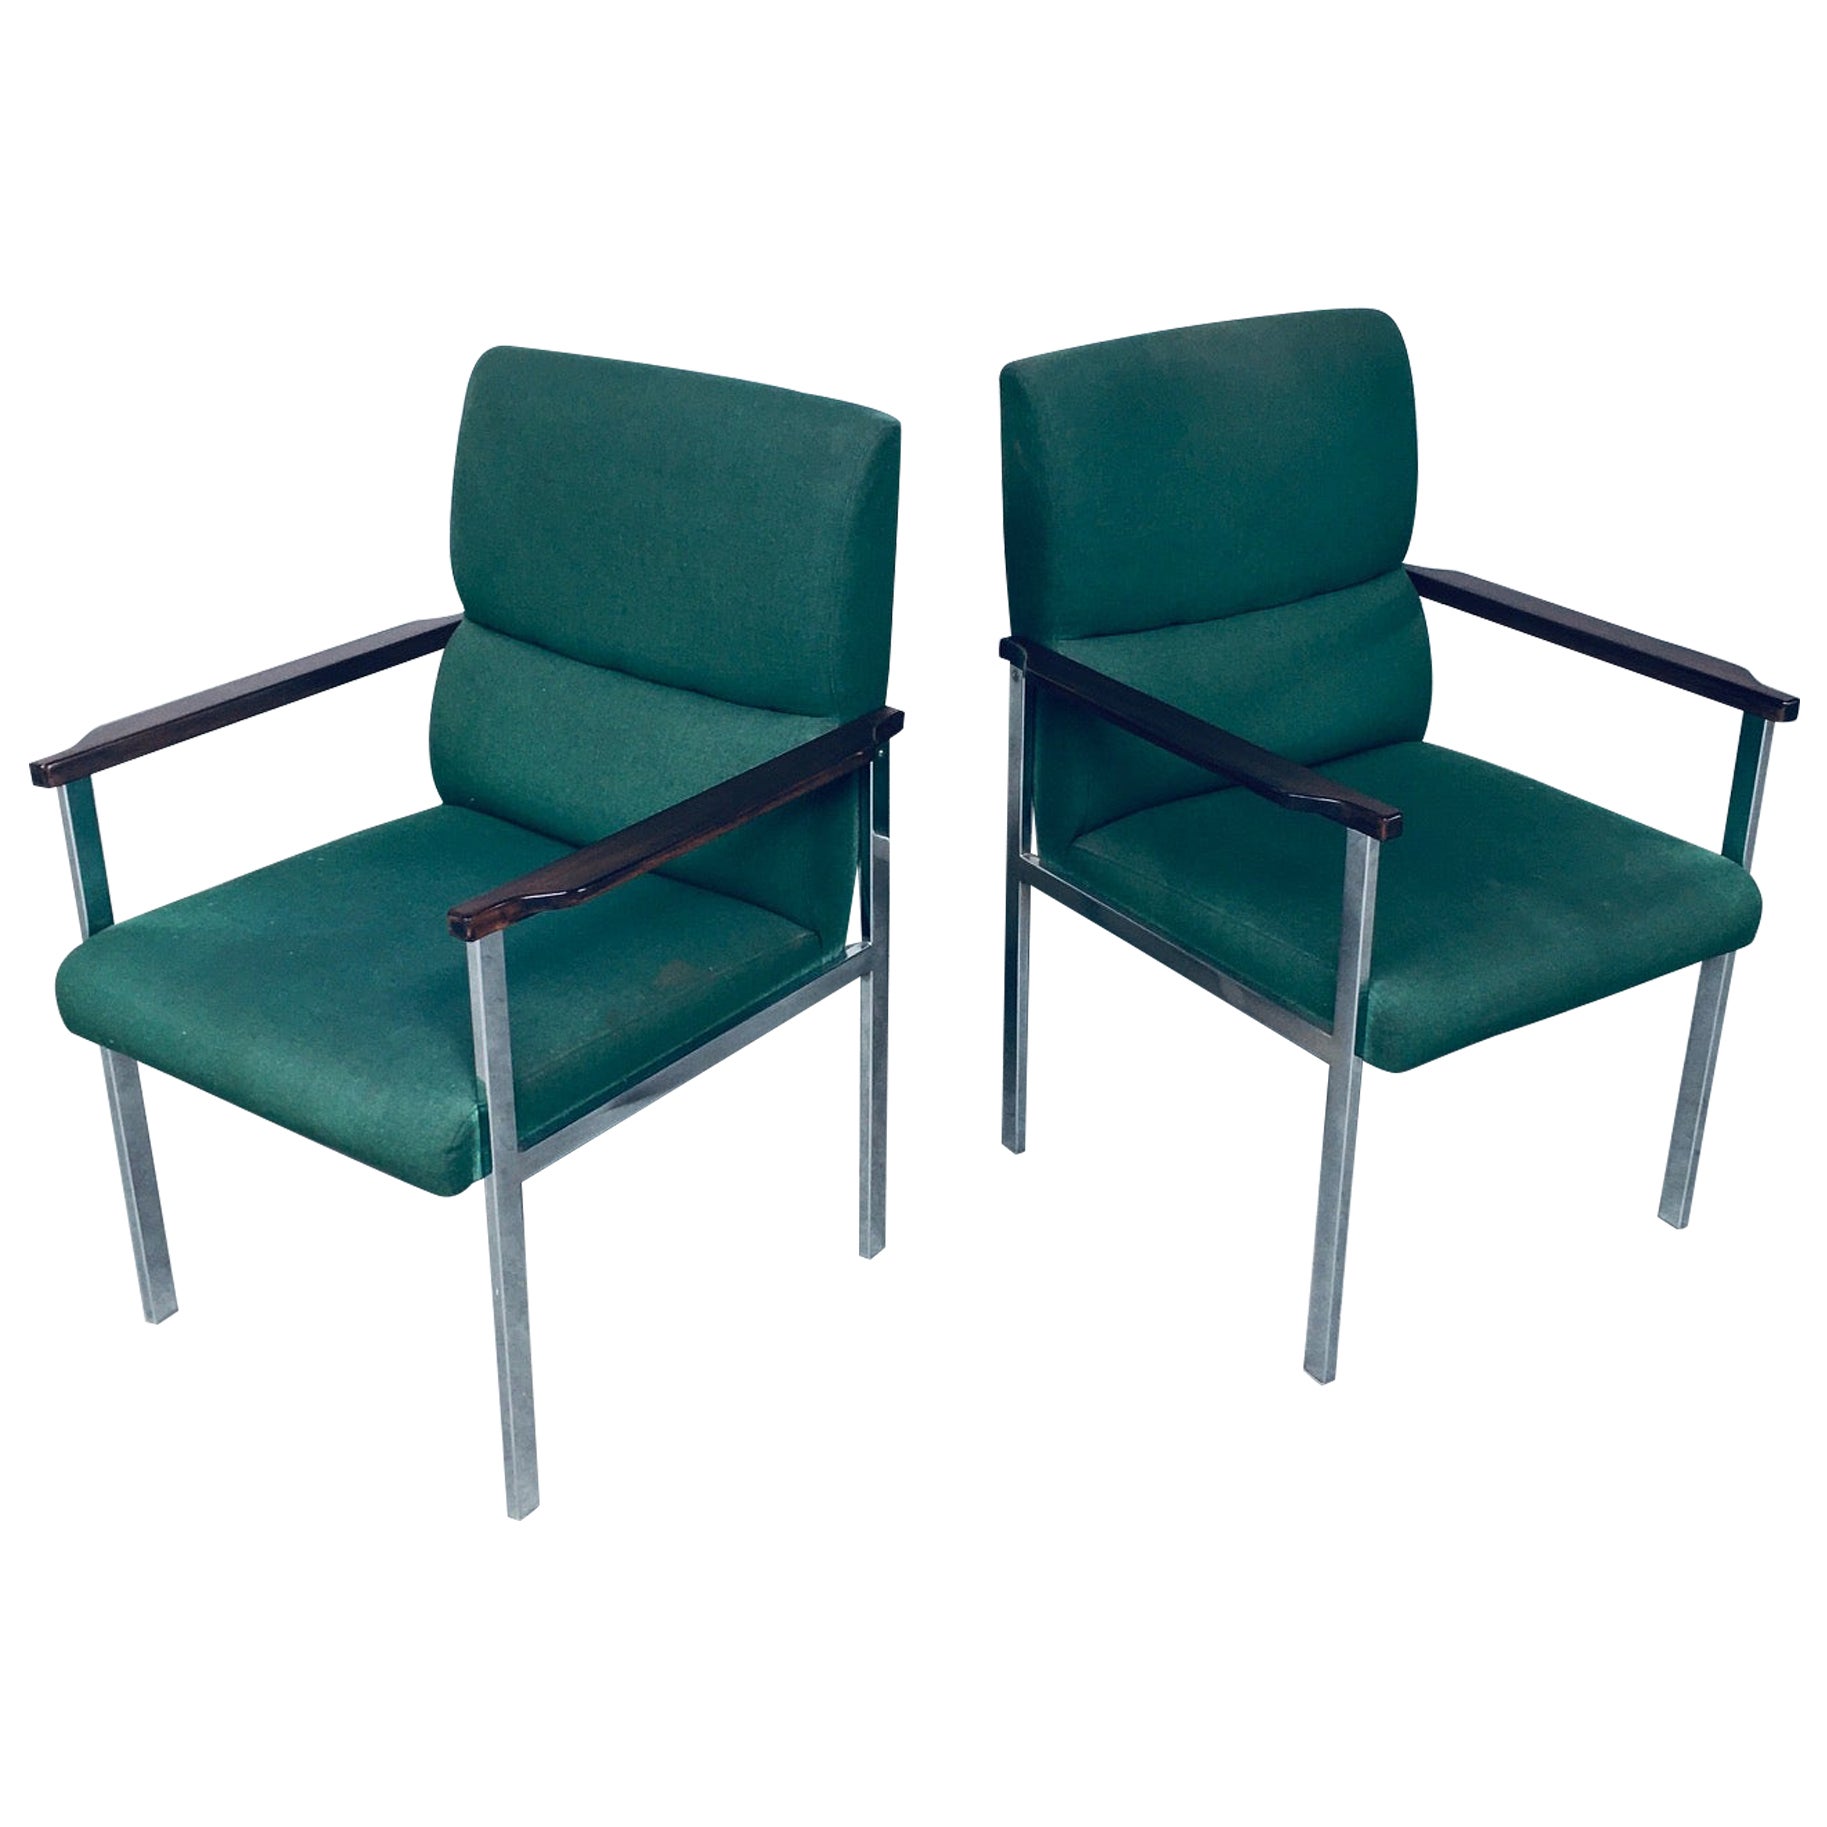 Midcentury Modern Design Pair of Office Arm Chairs by Brune, Germany 1960's For Sale